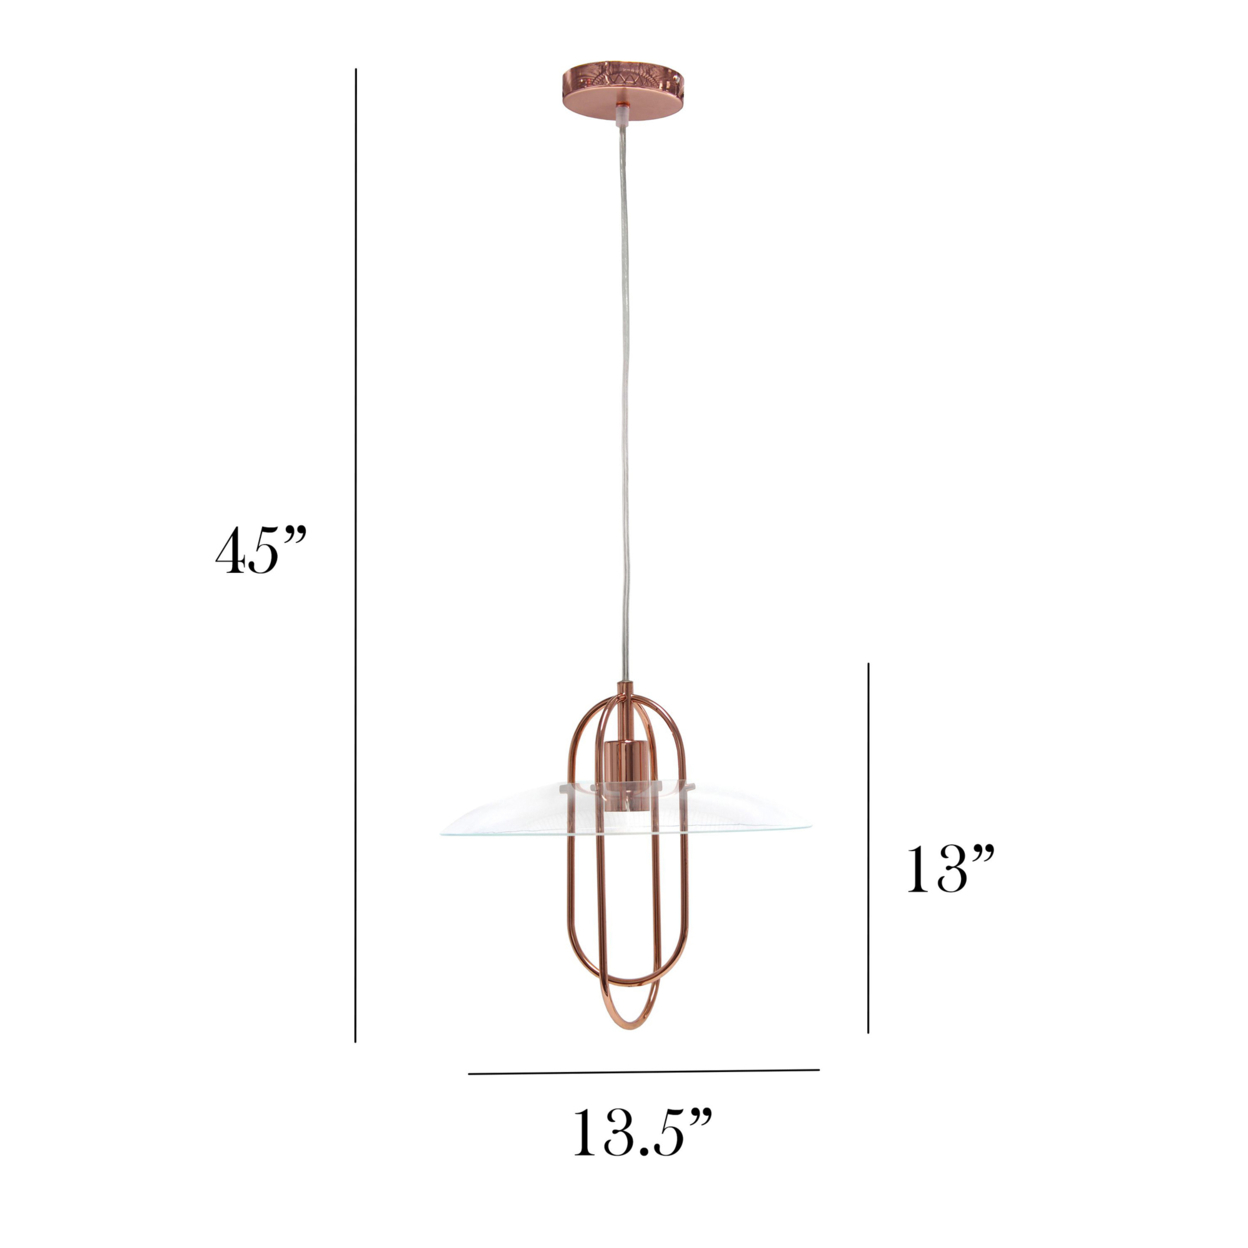 Simple Designs 1 Light Modern Metal Pendant Light with Clear Glass Shade - Rose Gold - image 5 of 8